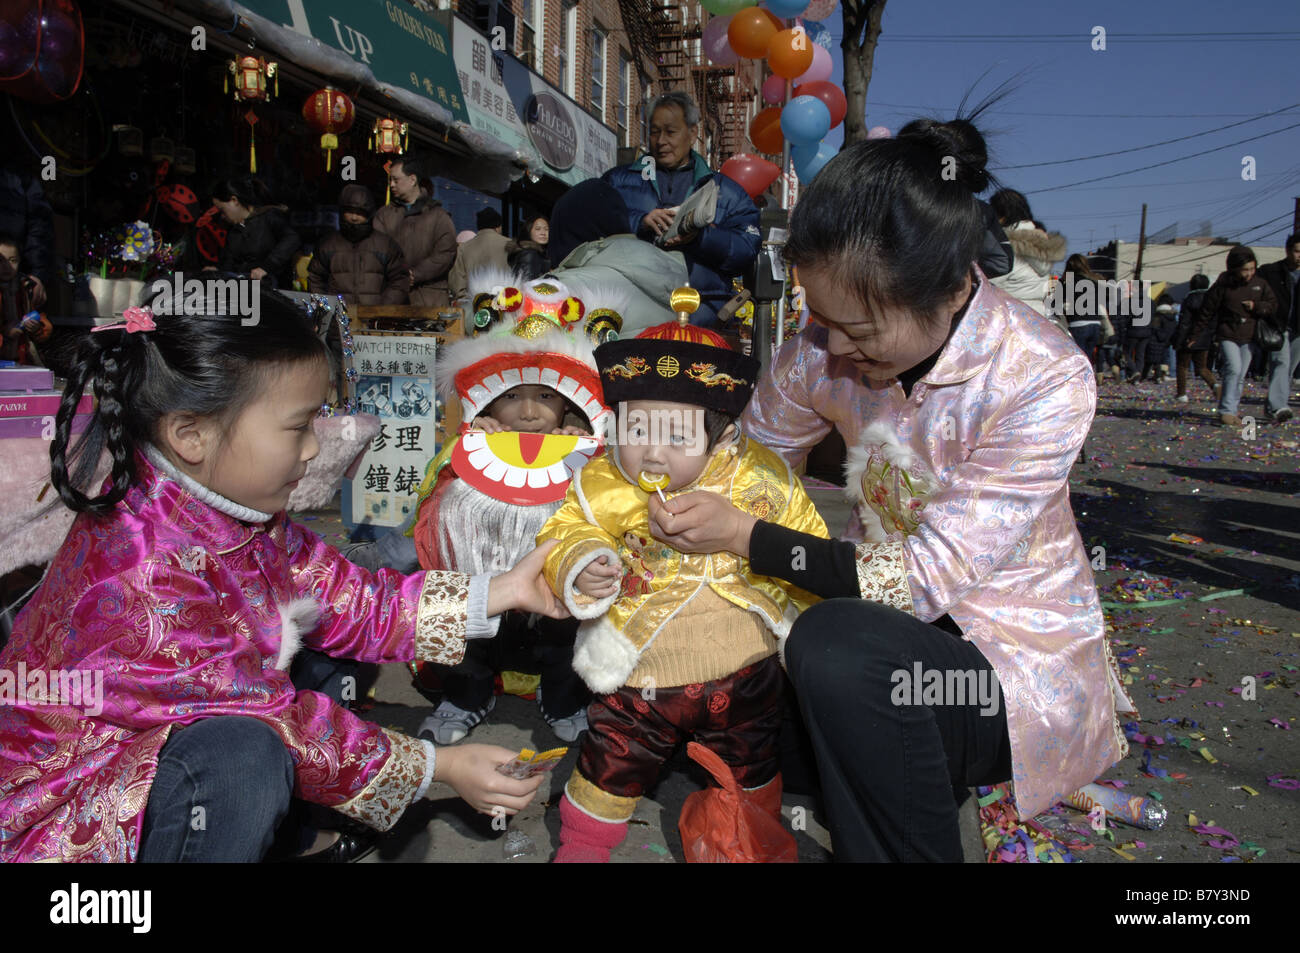 The annual Chinese Lunar New Year Parade in the Brooklyn neighborhood of Sunset Park in New York Stock Photo